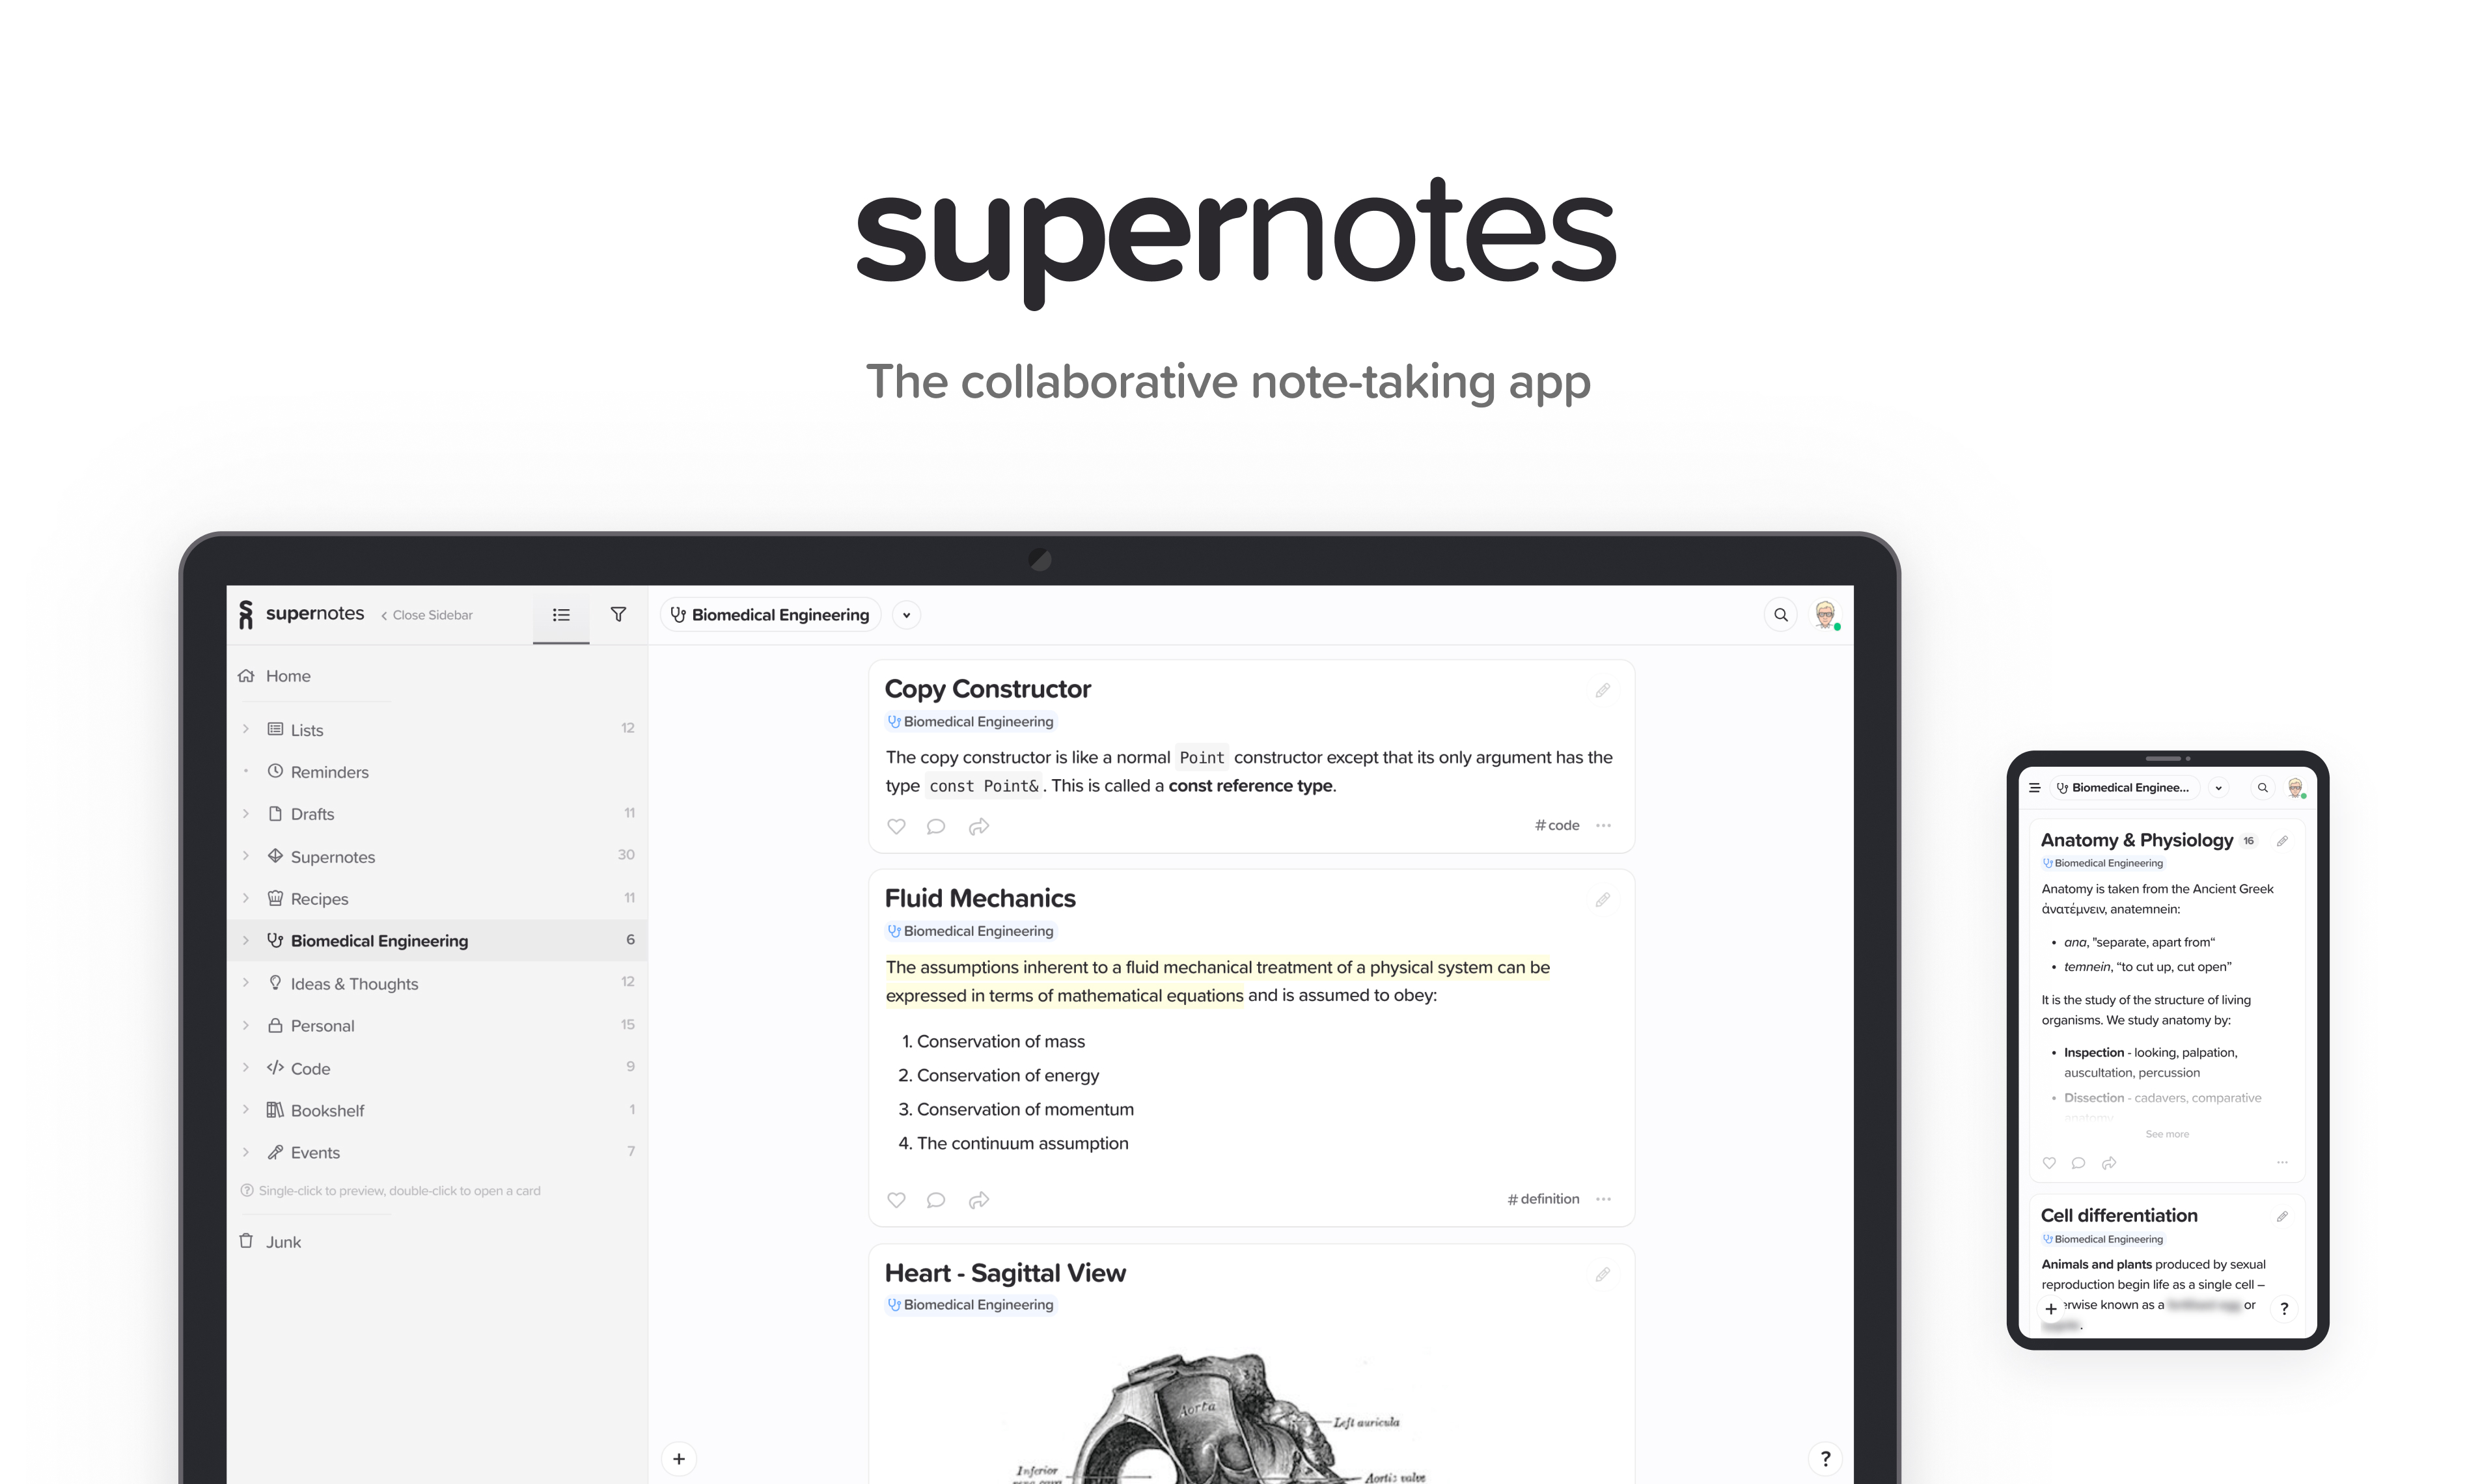 Find detailed information about Supernotes